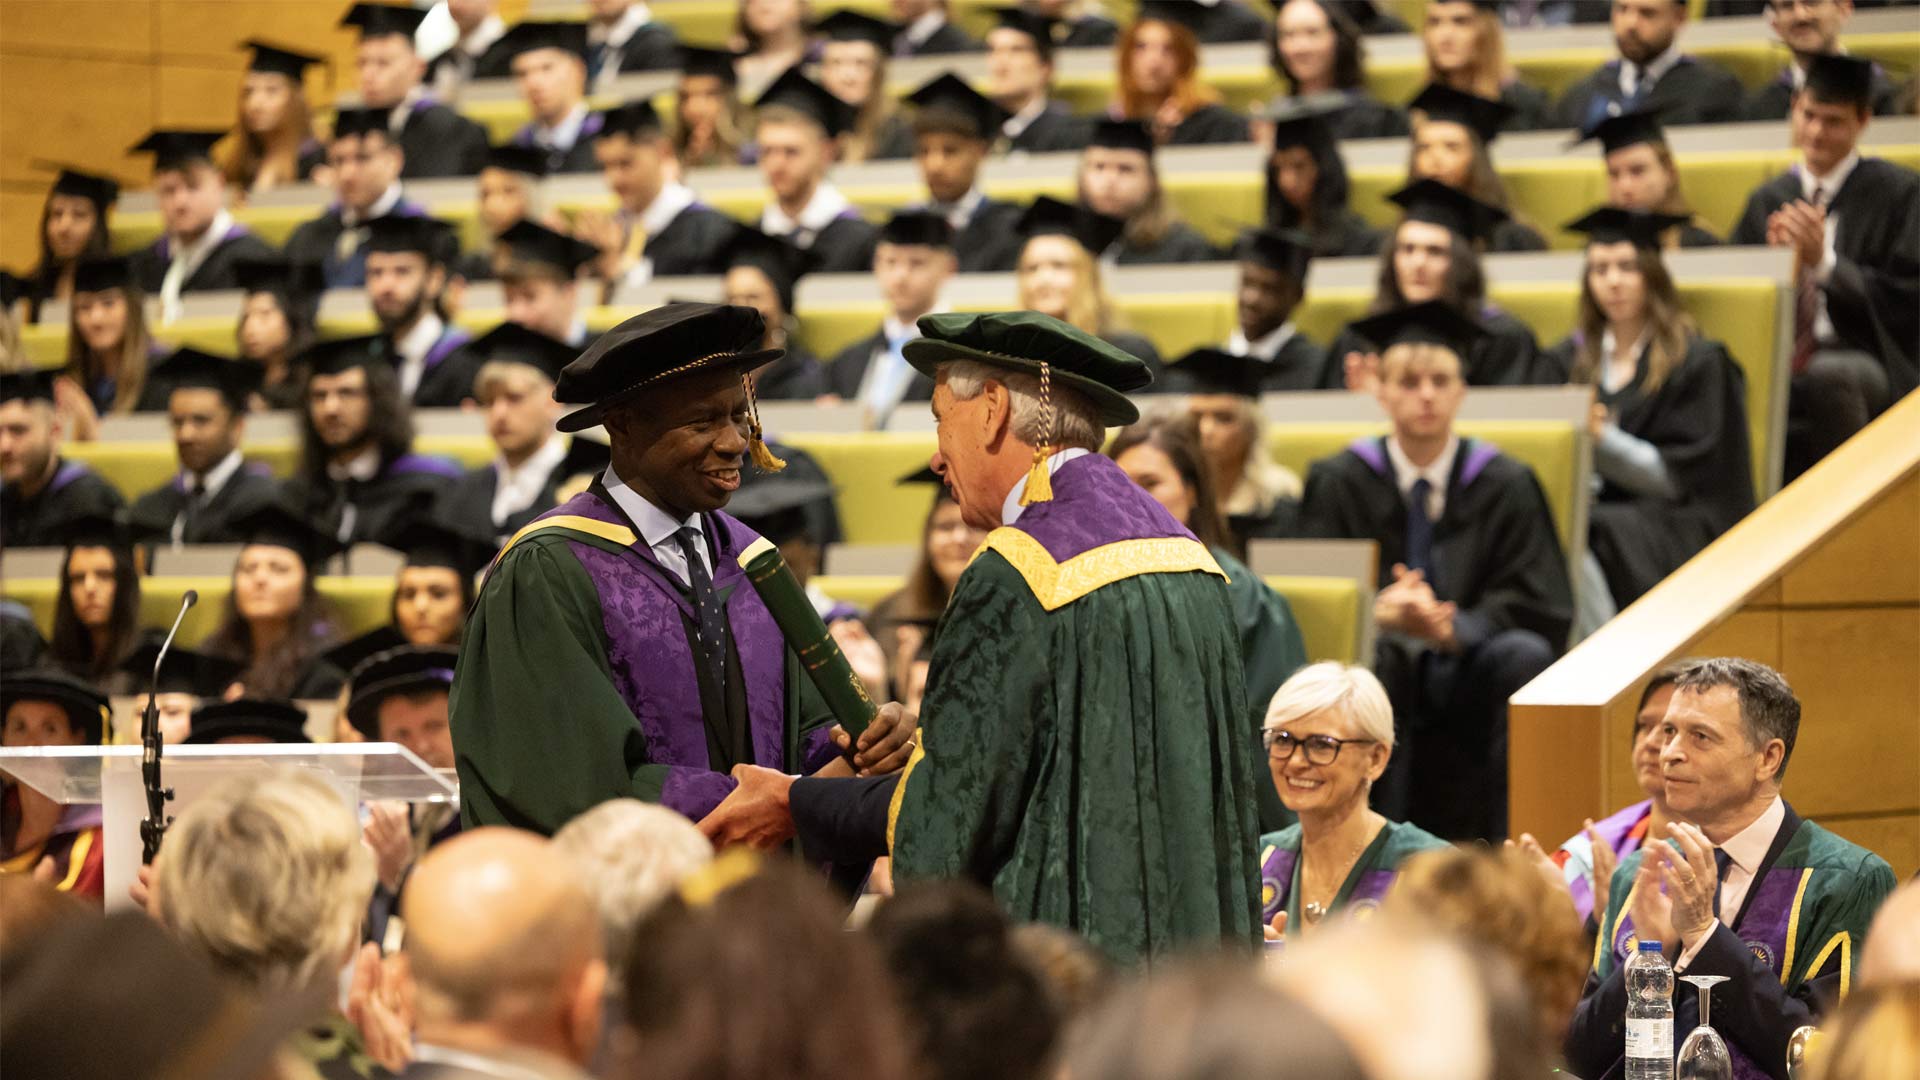 Clive Myrie accepting his honorary graduate award from John Cater